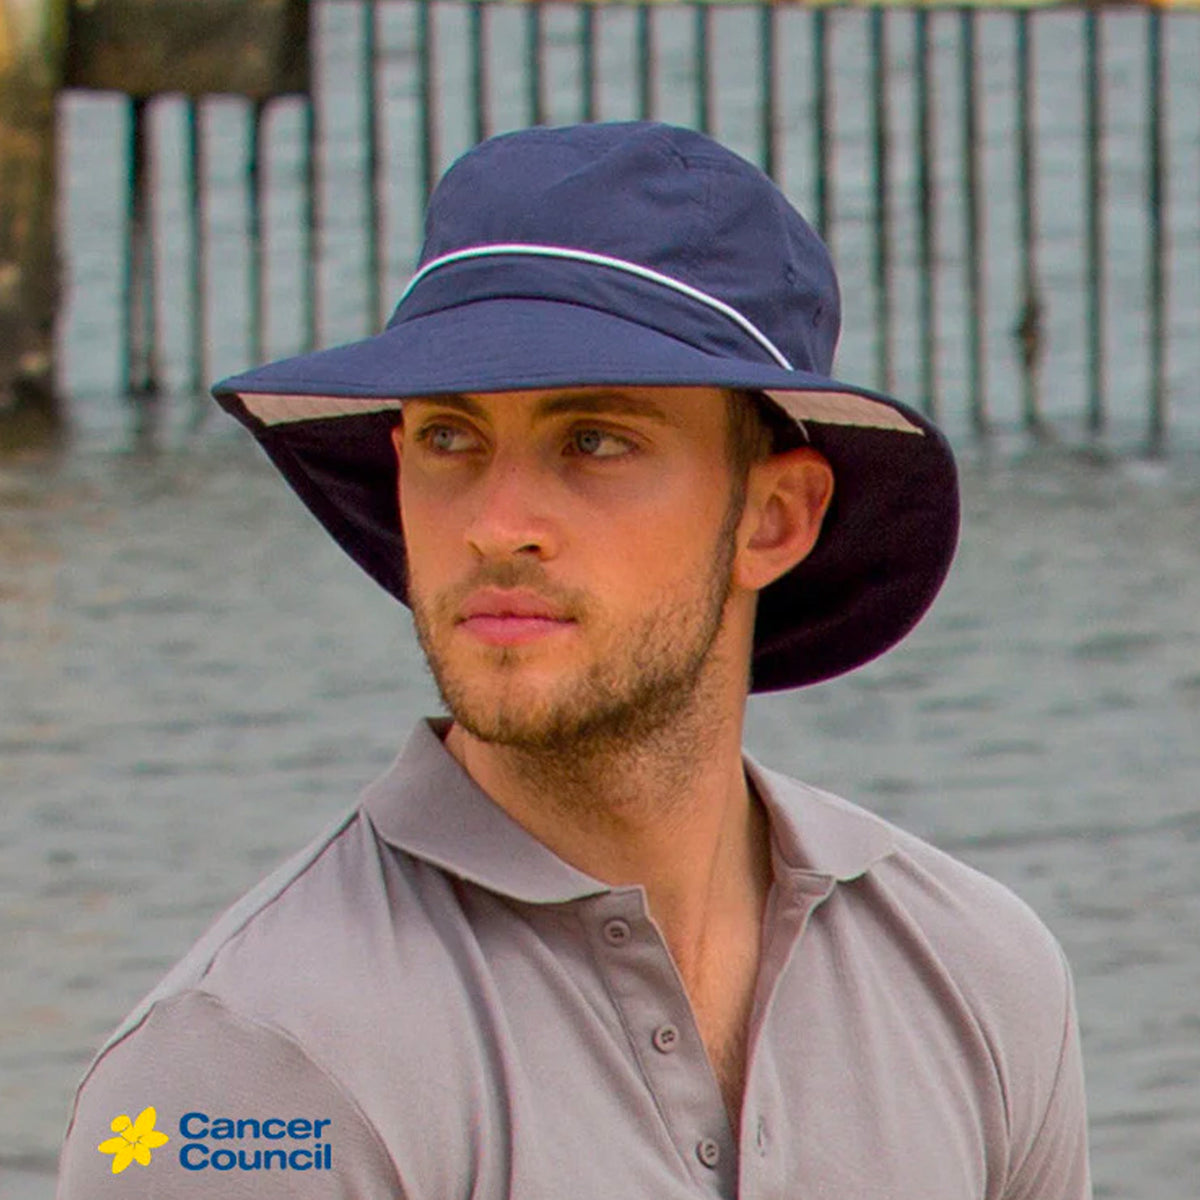 cancer council marvin bucket hat in navy